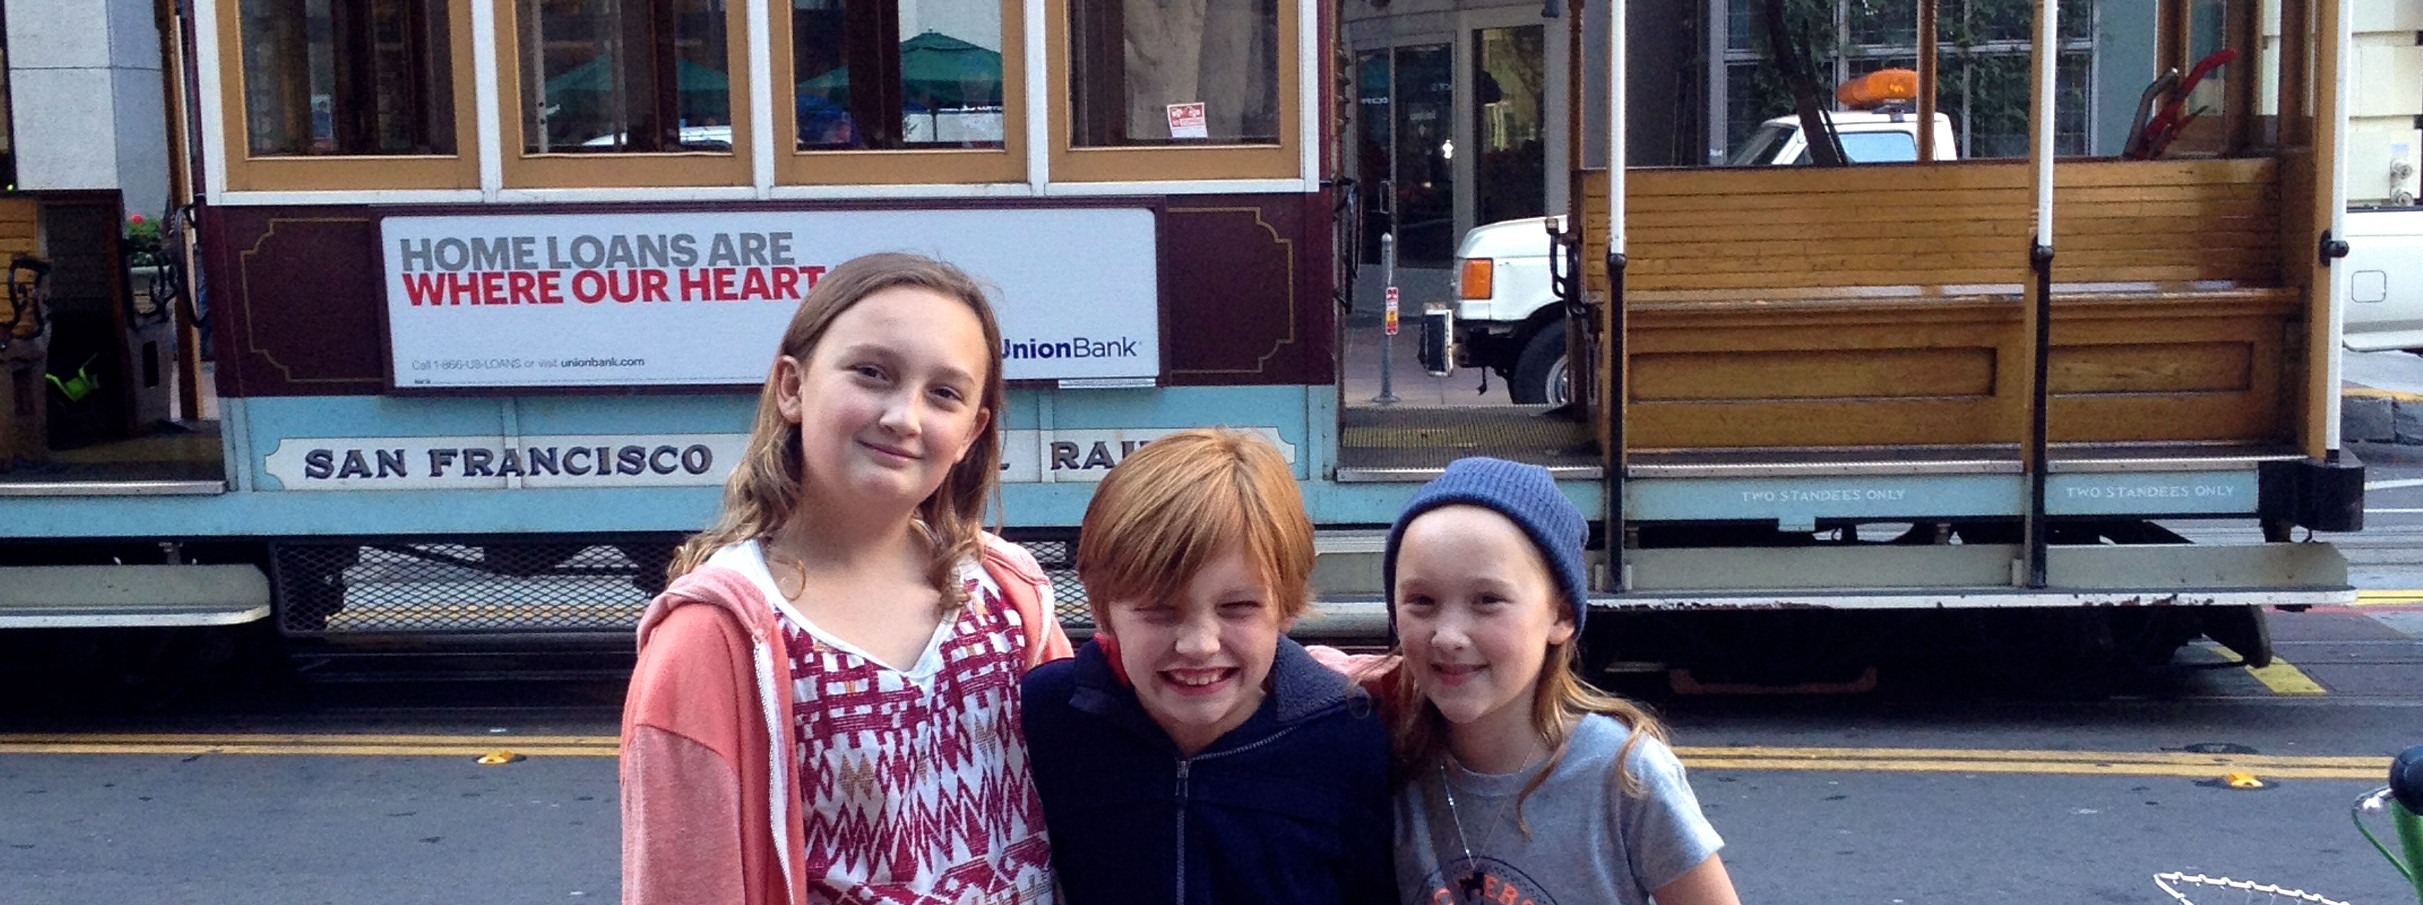 kids in front of trolley car